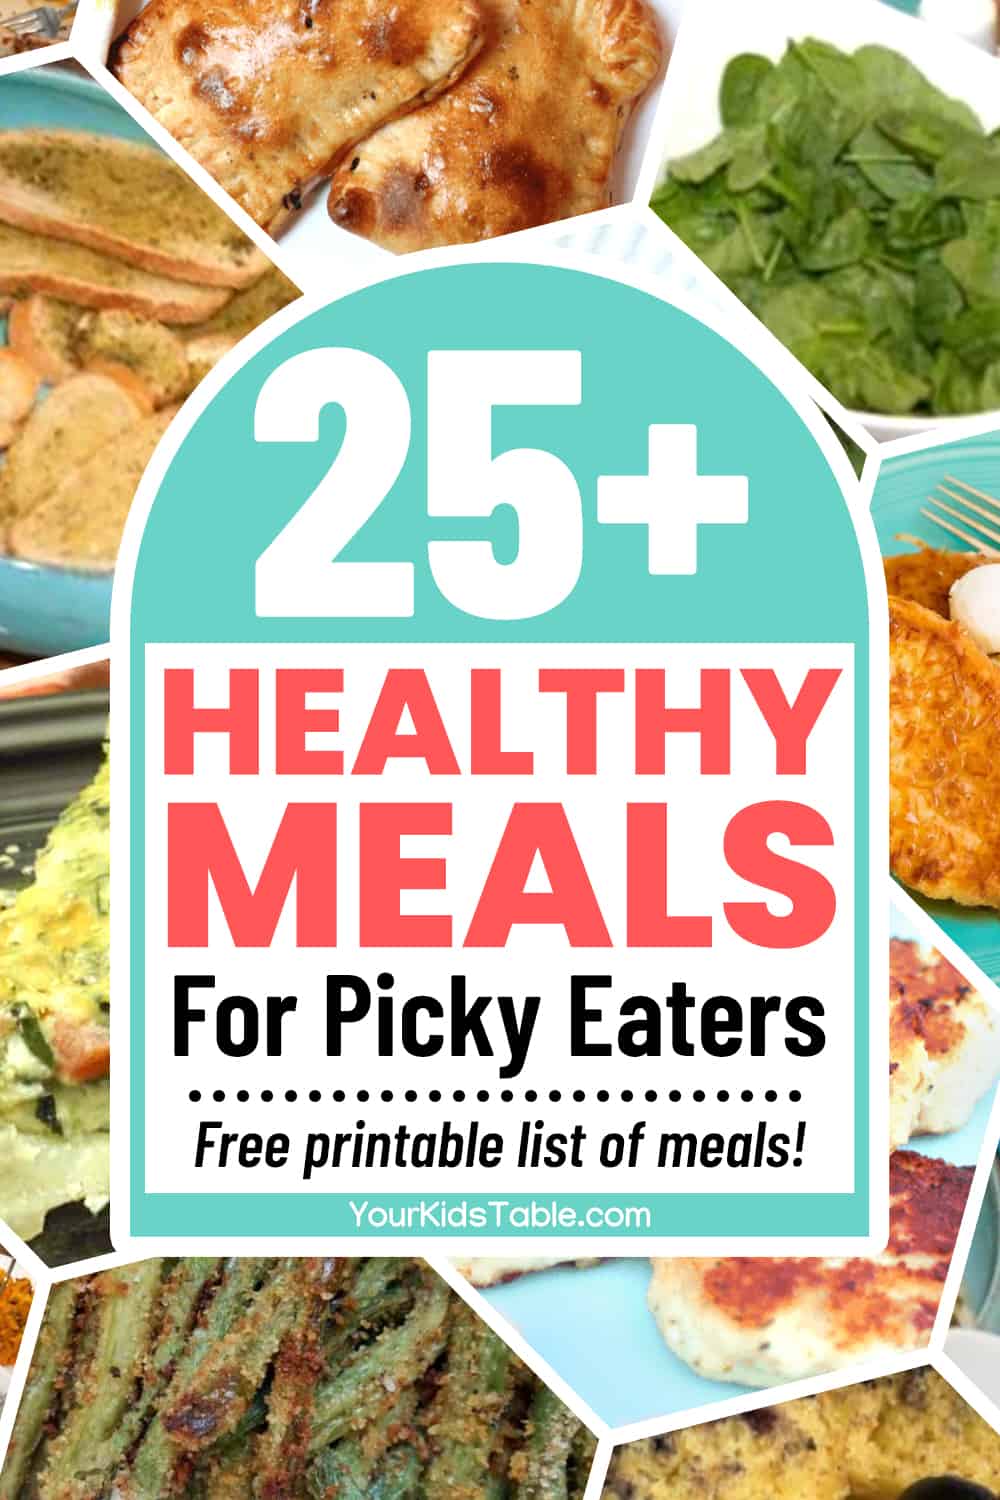 25+ healthy meals for picky eaters that are easy and kid friendly. Free PDF printable with meal ideas!